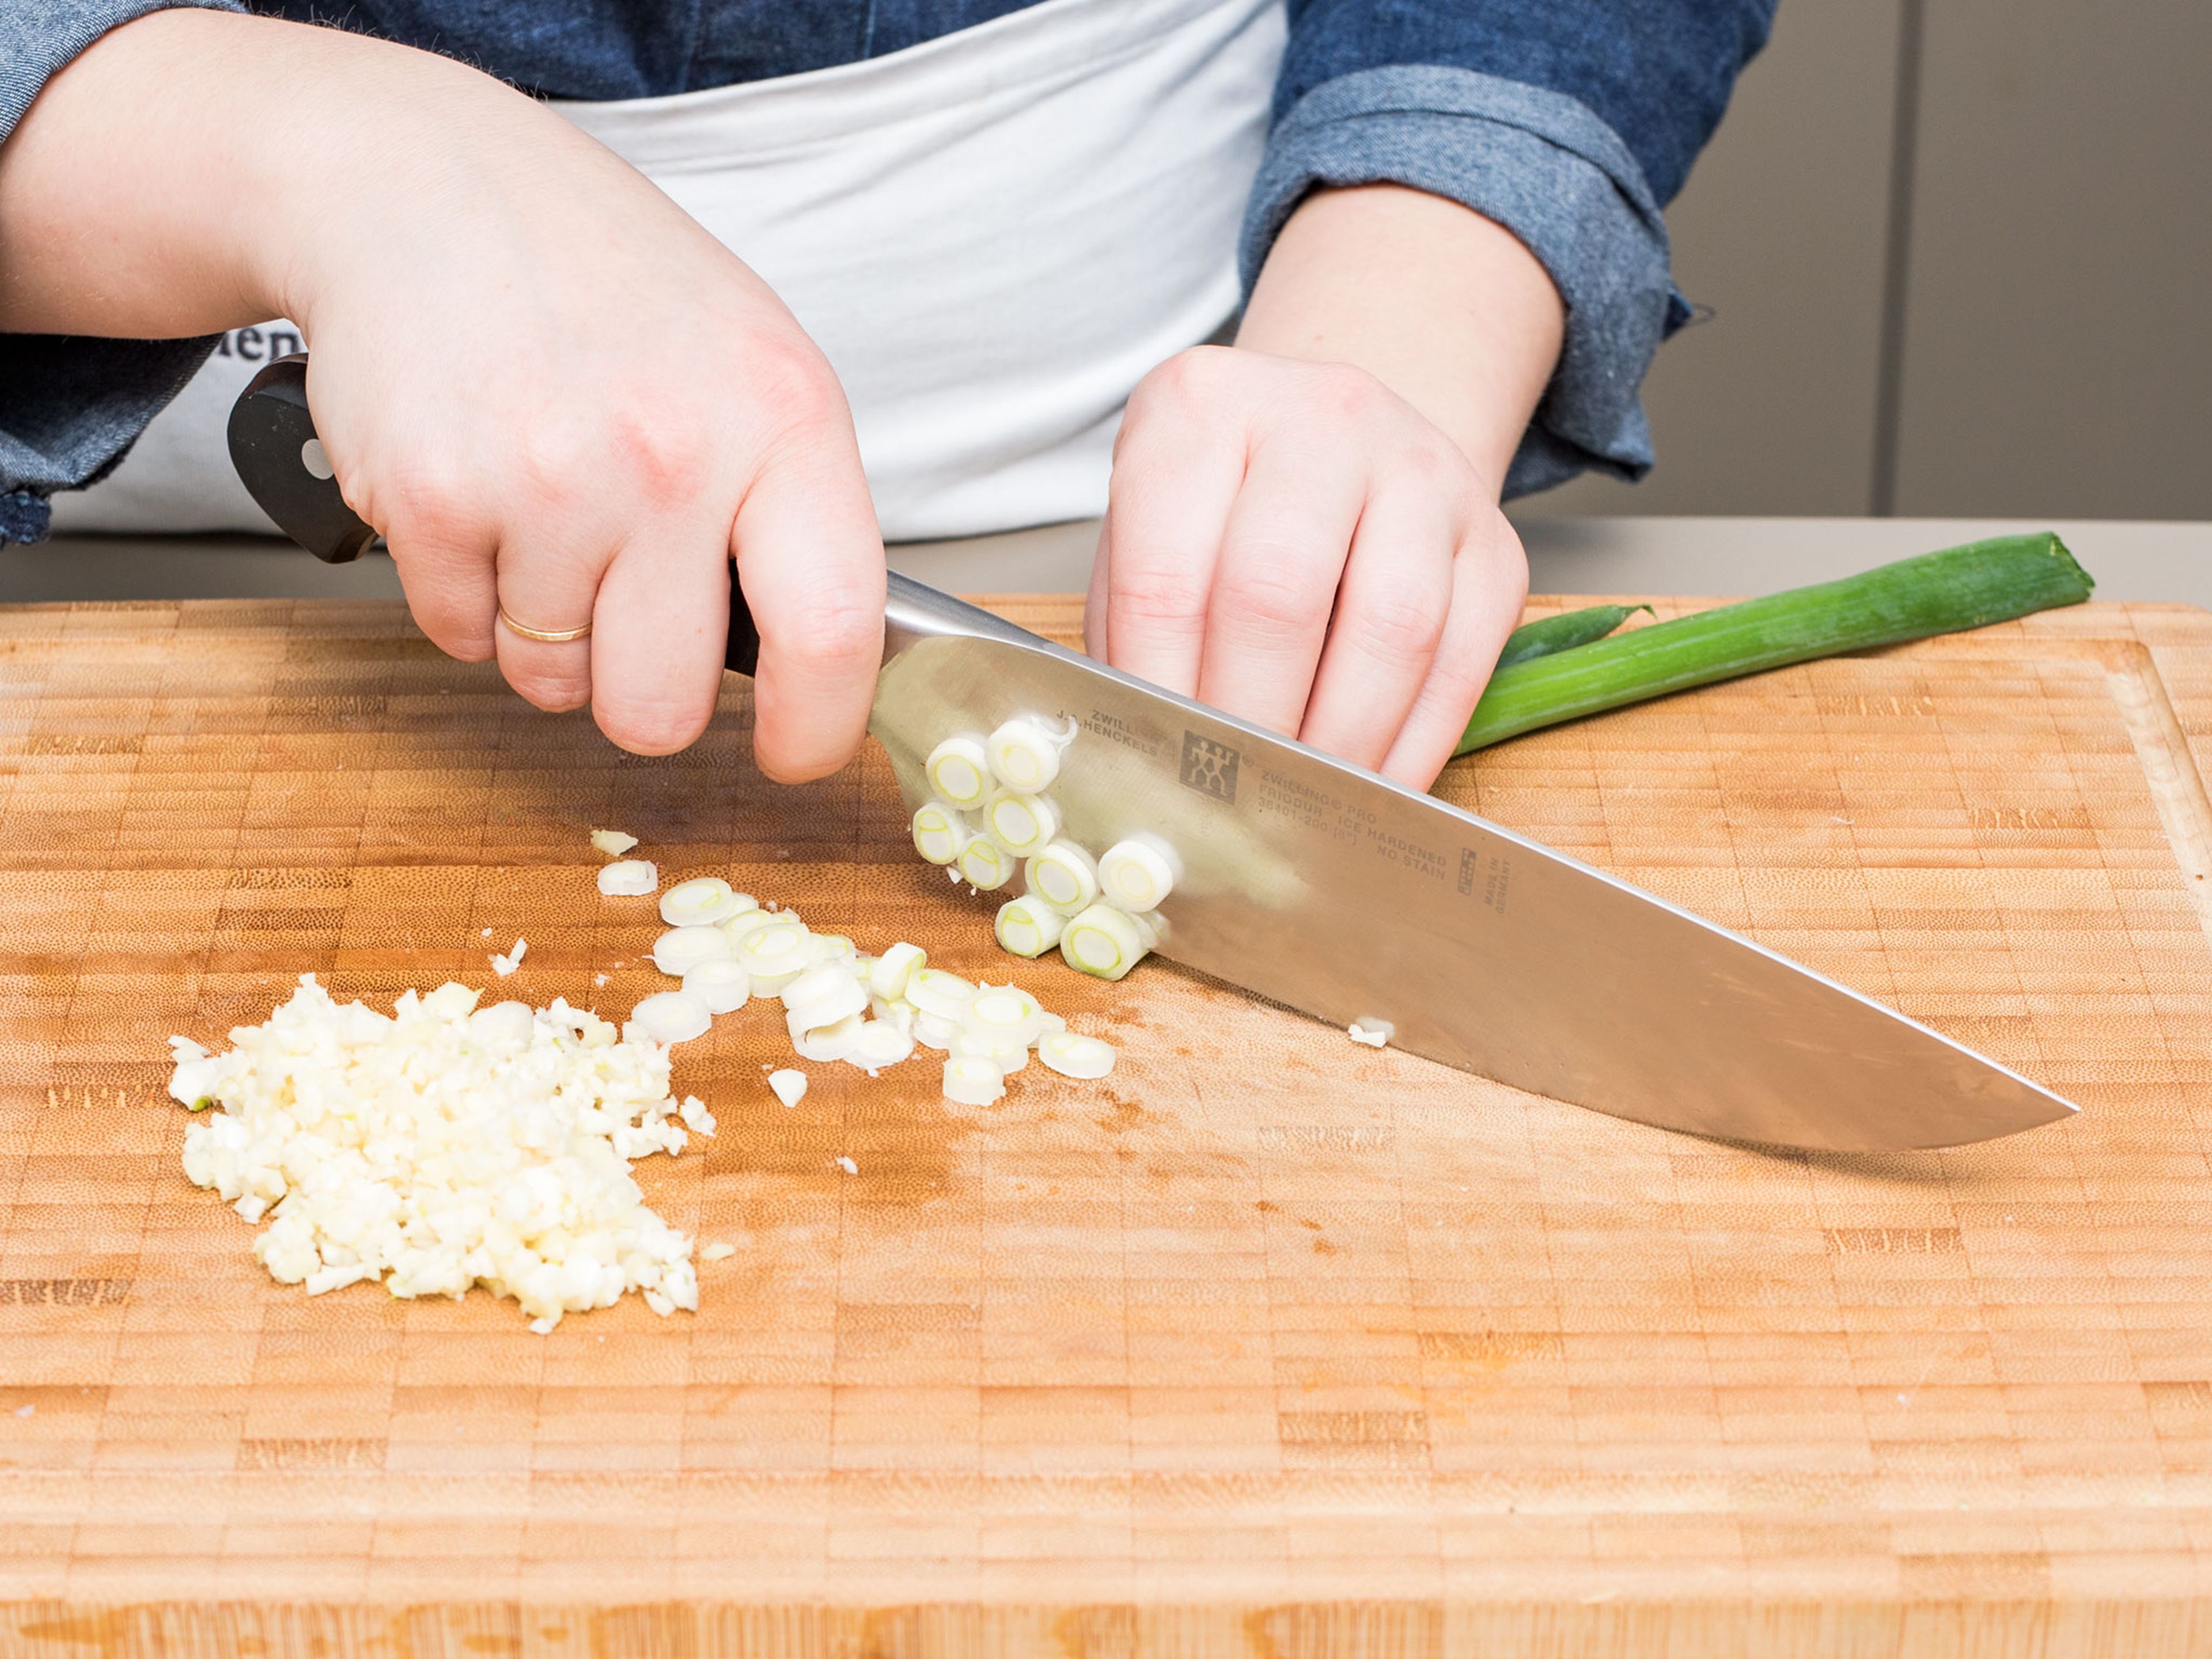 Peel and finely chop some garlic and ginger. Cut the white part of scallions in rings, save the green part for later.